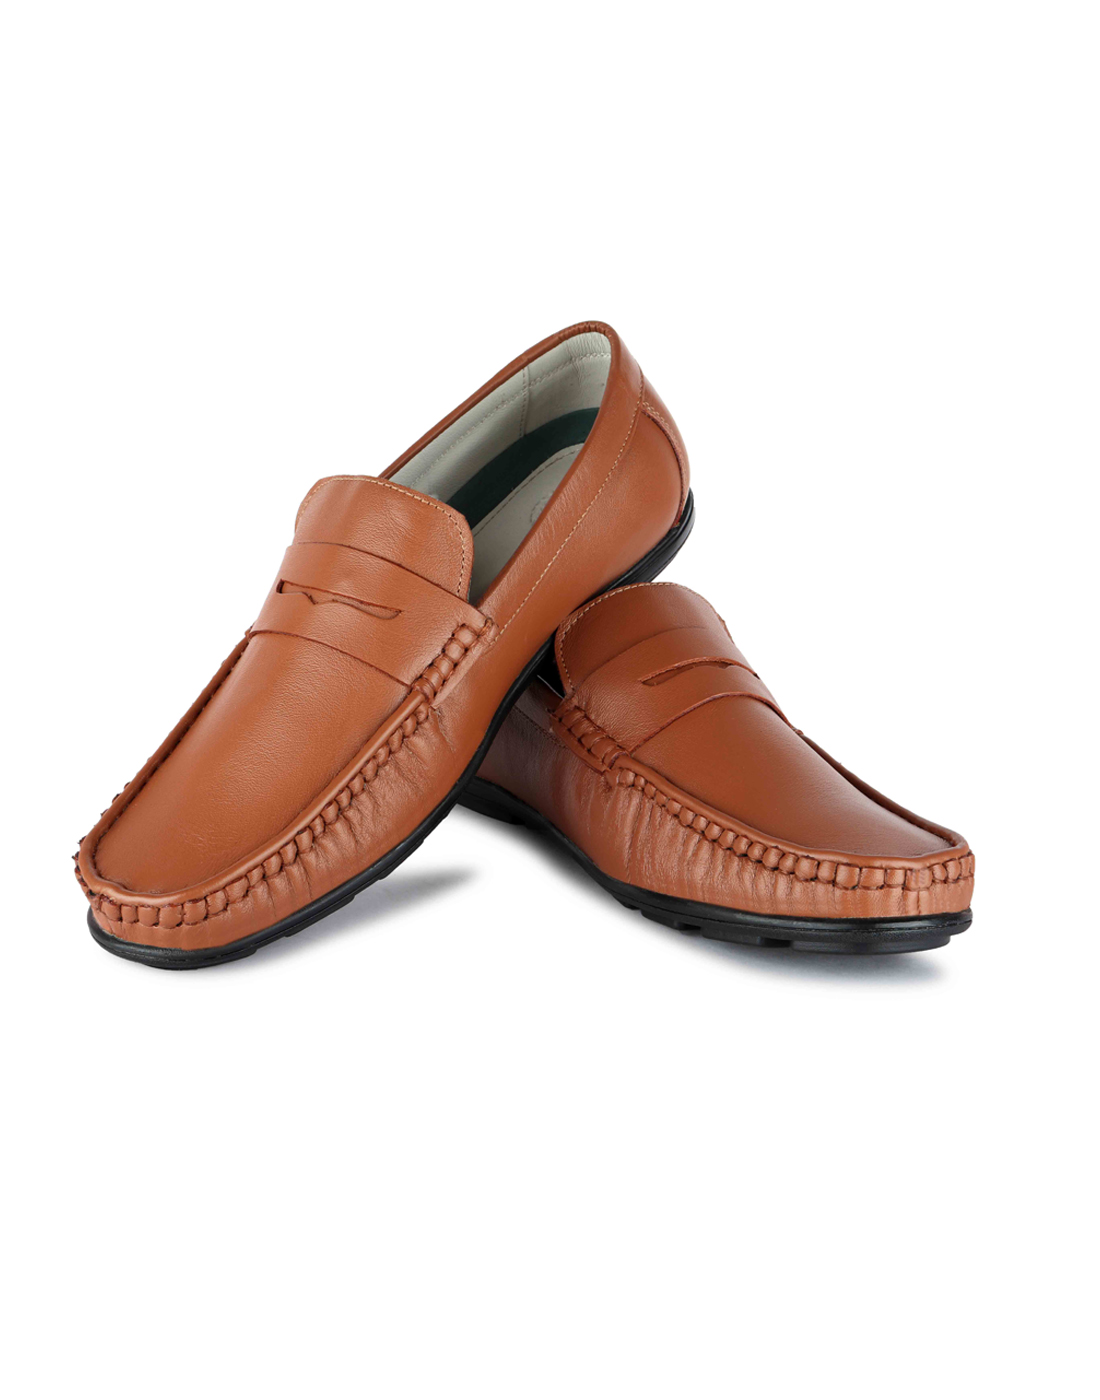 Tan Loafers - Buy TanPure Leather Loafers @ Rs.1800 Only | Agra Shoe Mart